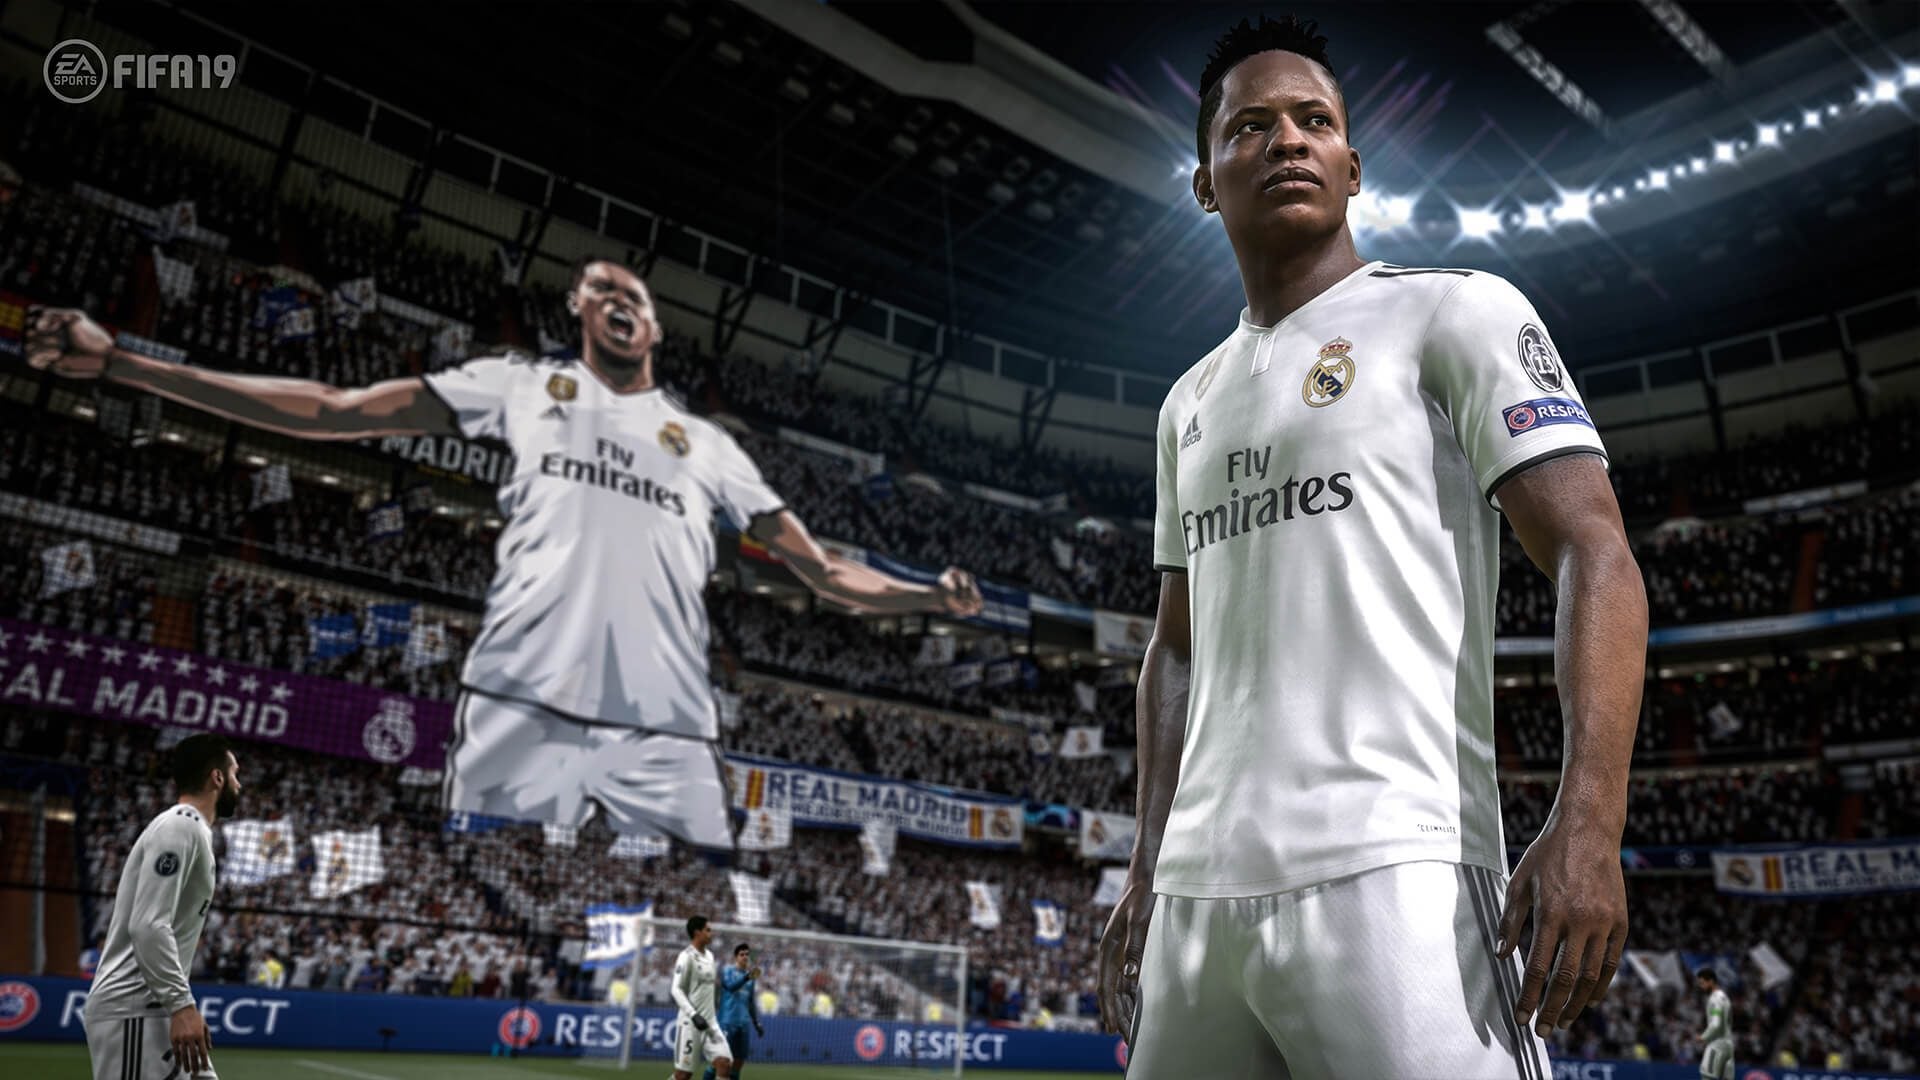 FIFA review - latest just manages to score off the cross bar | VG247